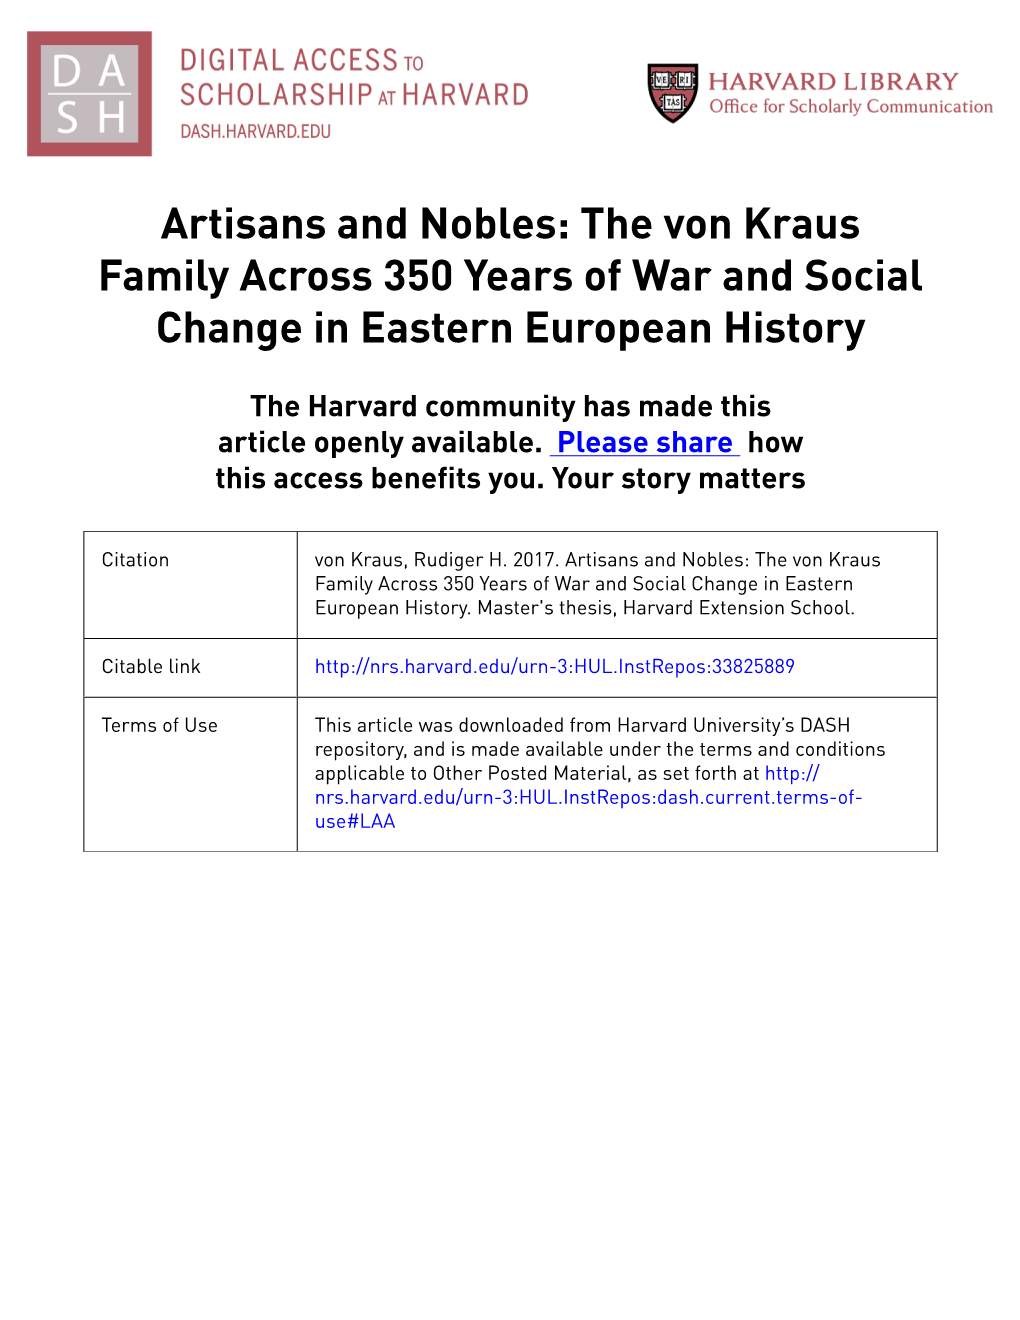 The Von Kraus Family Across 350 Years of War and Social Change in Eastern European History